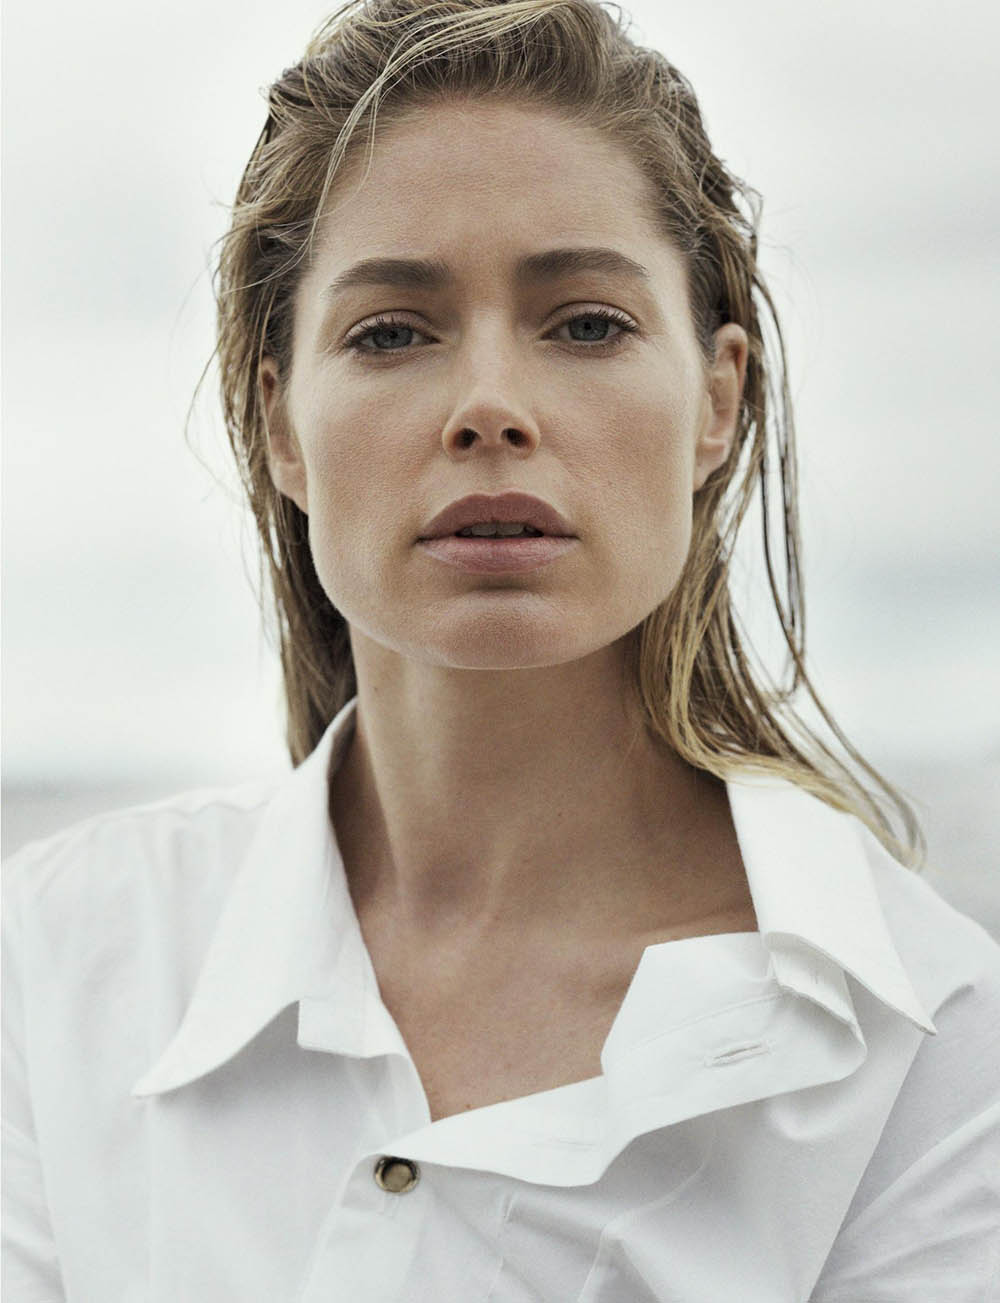 Doutzen Kroes covers ES Magazine August 10th, 2018 by Rory Payne